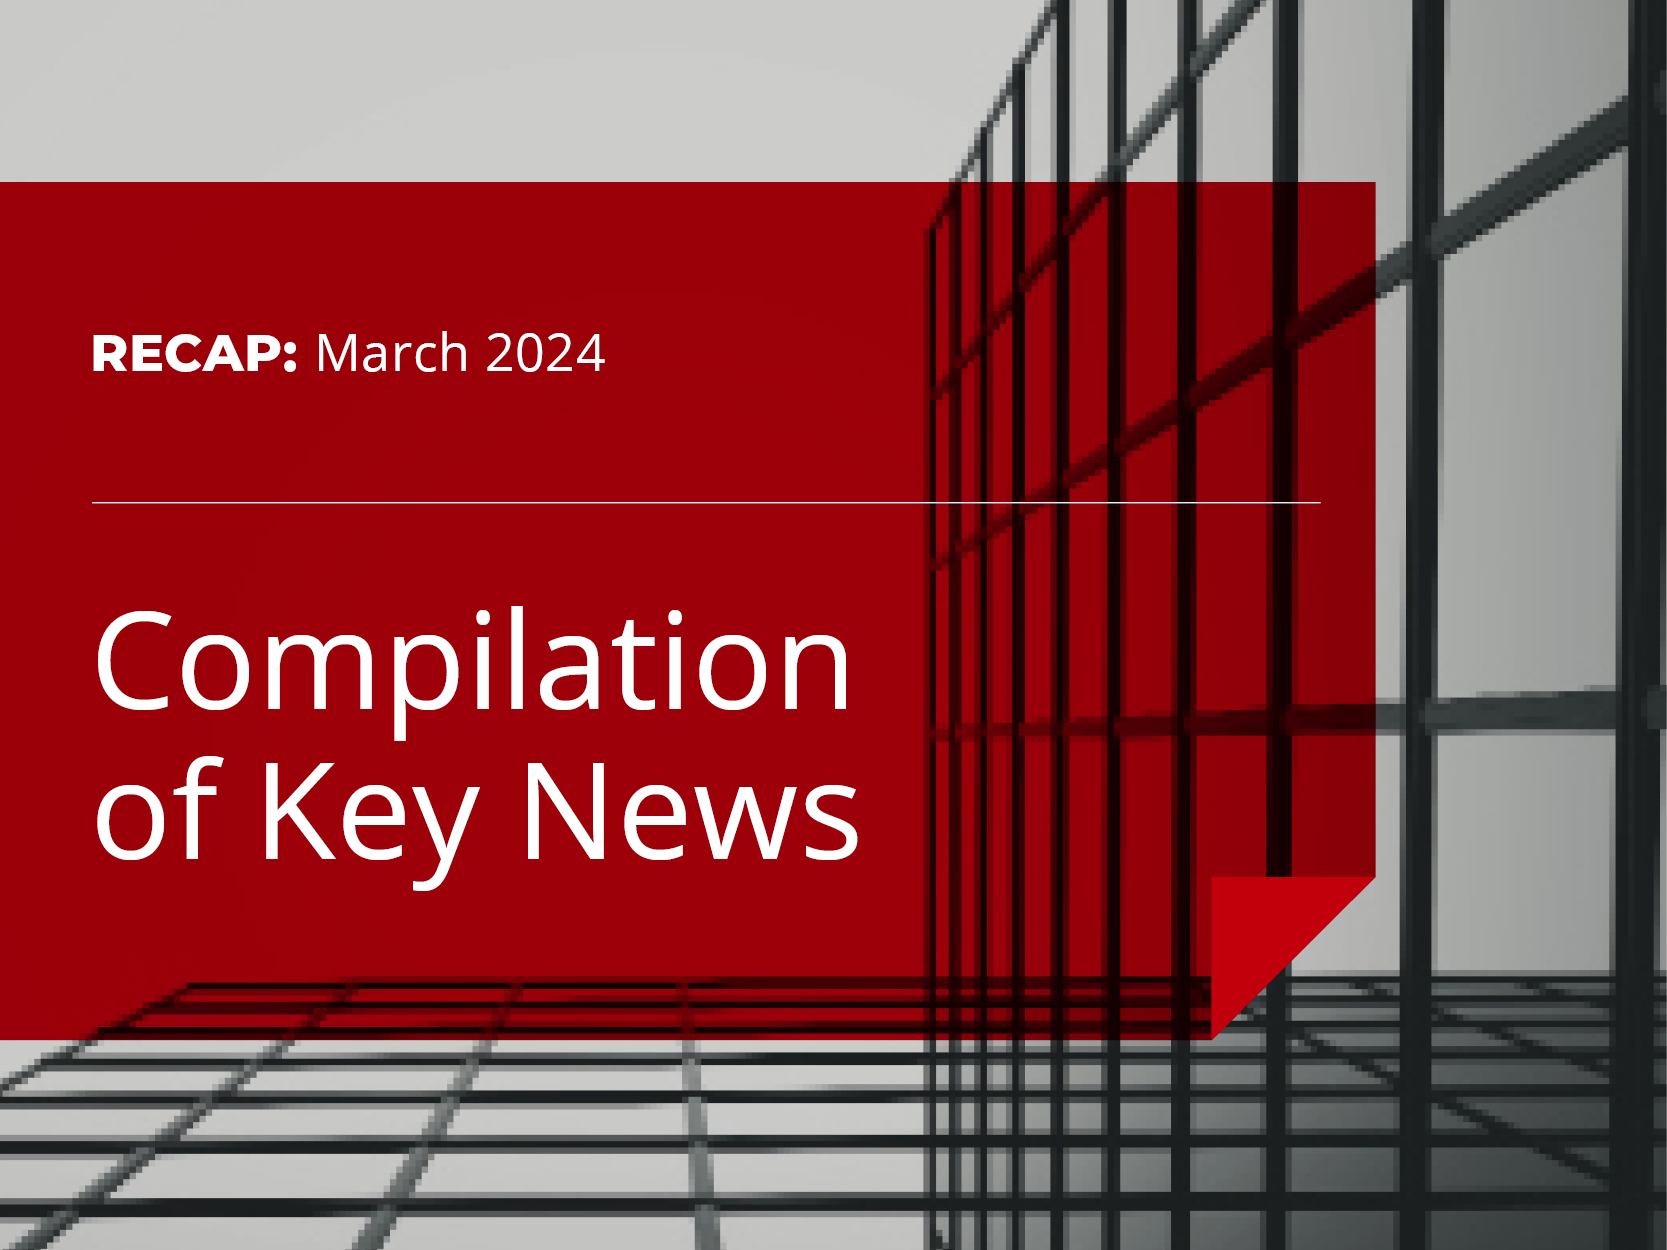 Key News Compilation March 2024